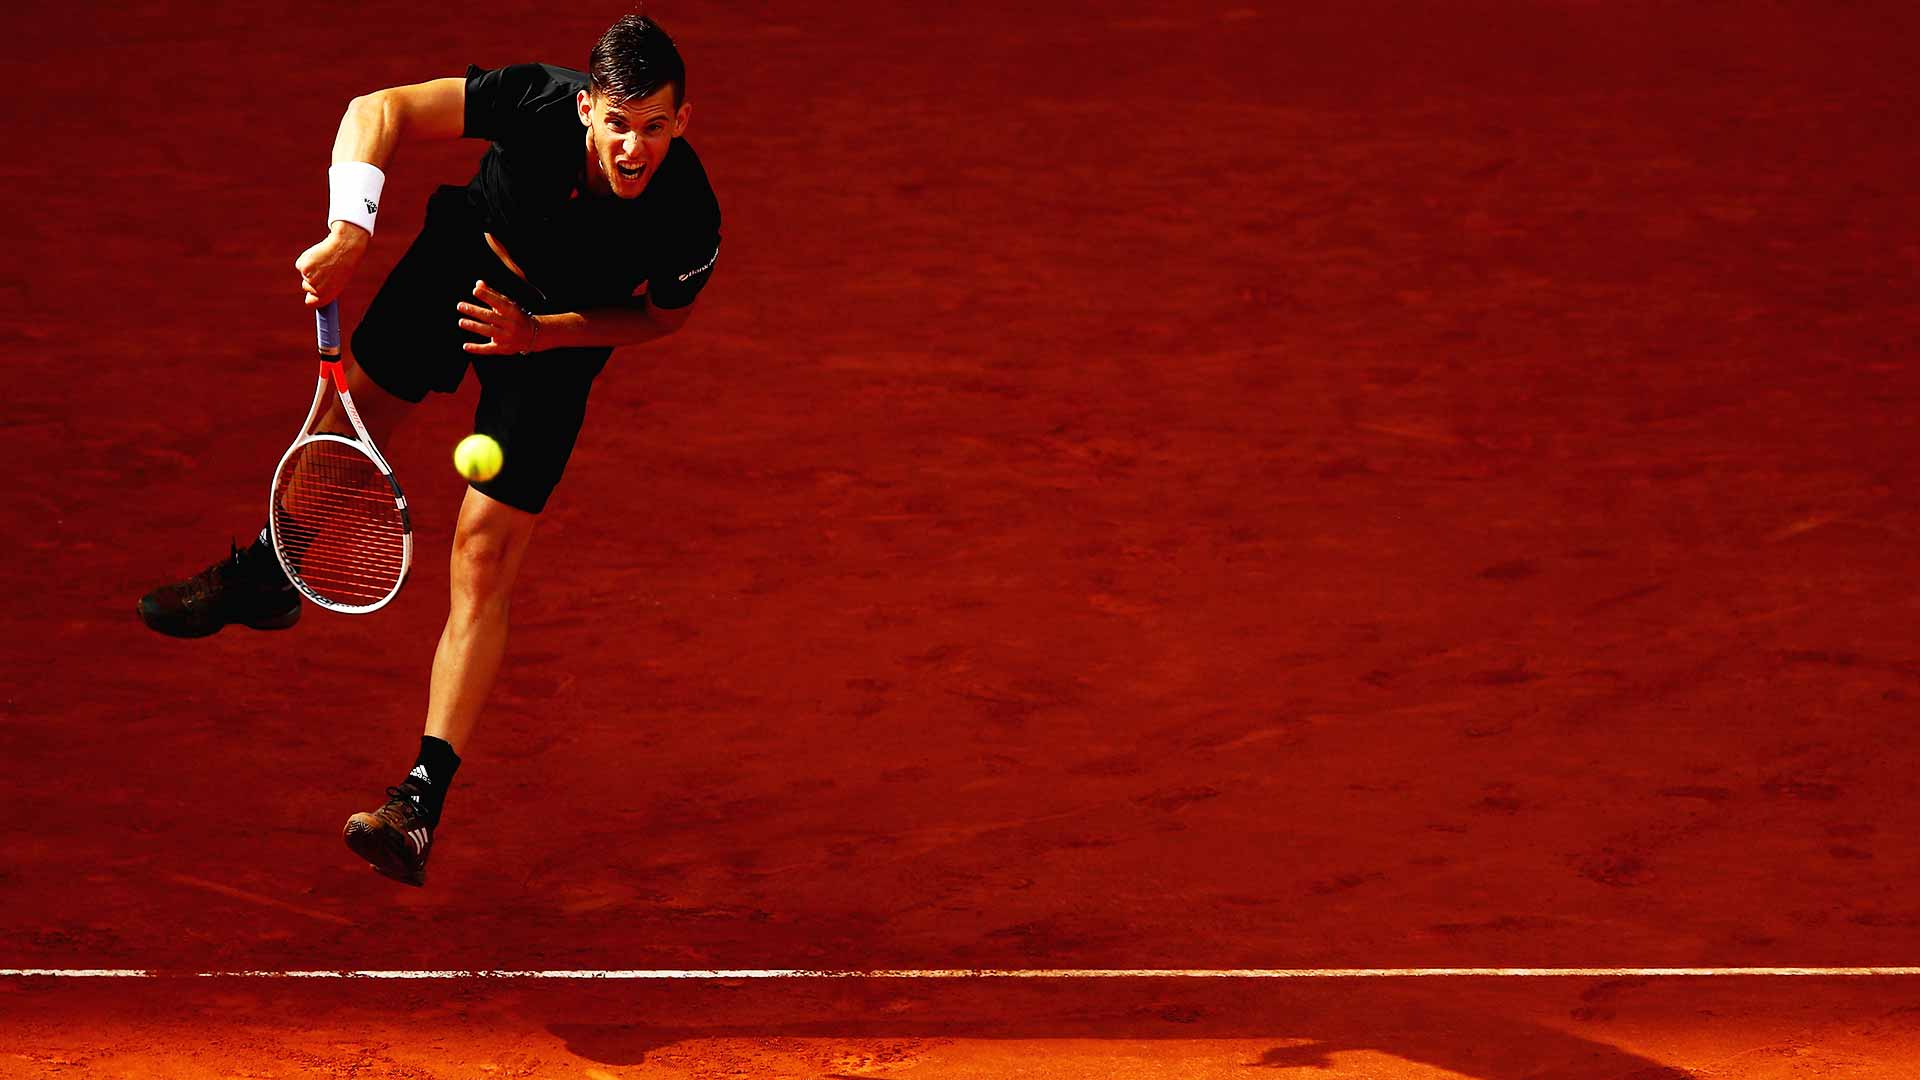 Dominic Thiem ends Rafael Nadal's 50-set winning streak on clay, and then beats the World No. 1 to make the Madrid semi-finals.